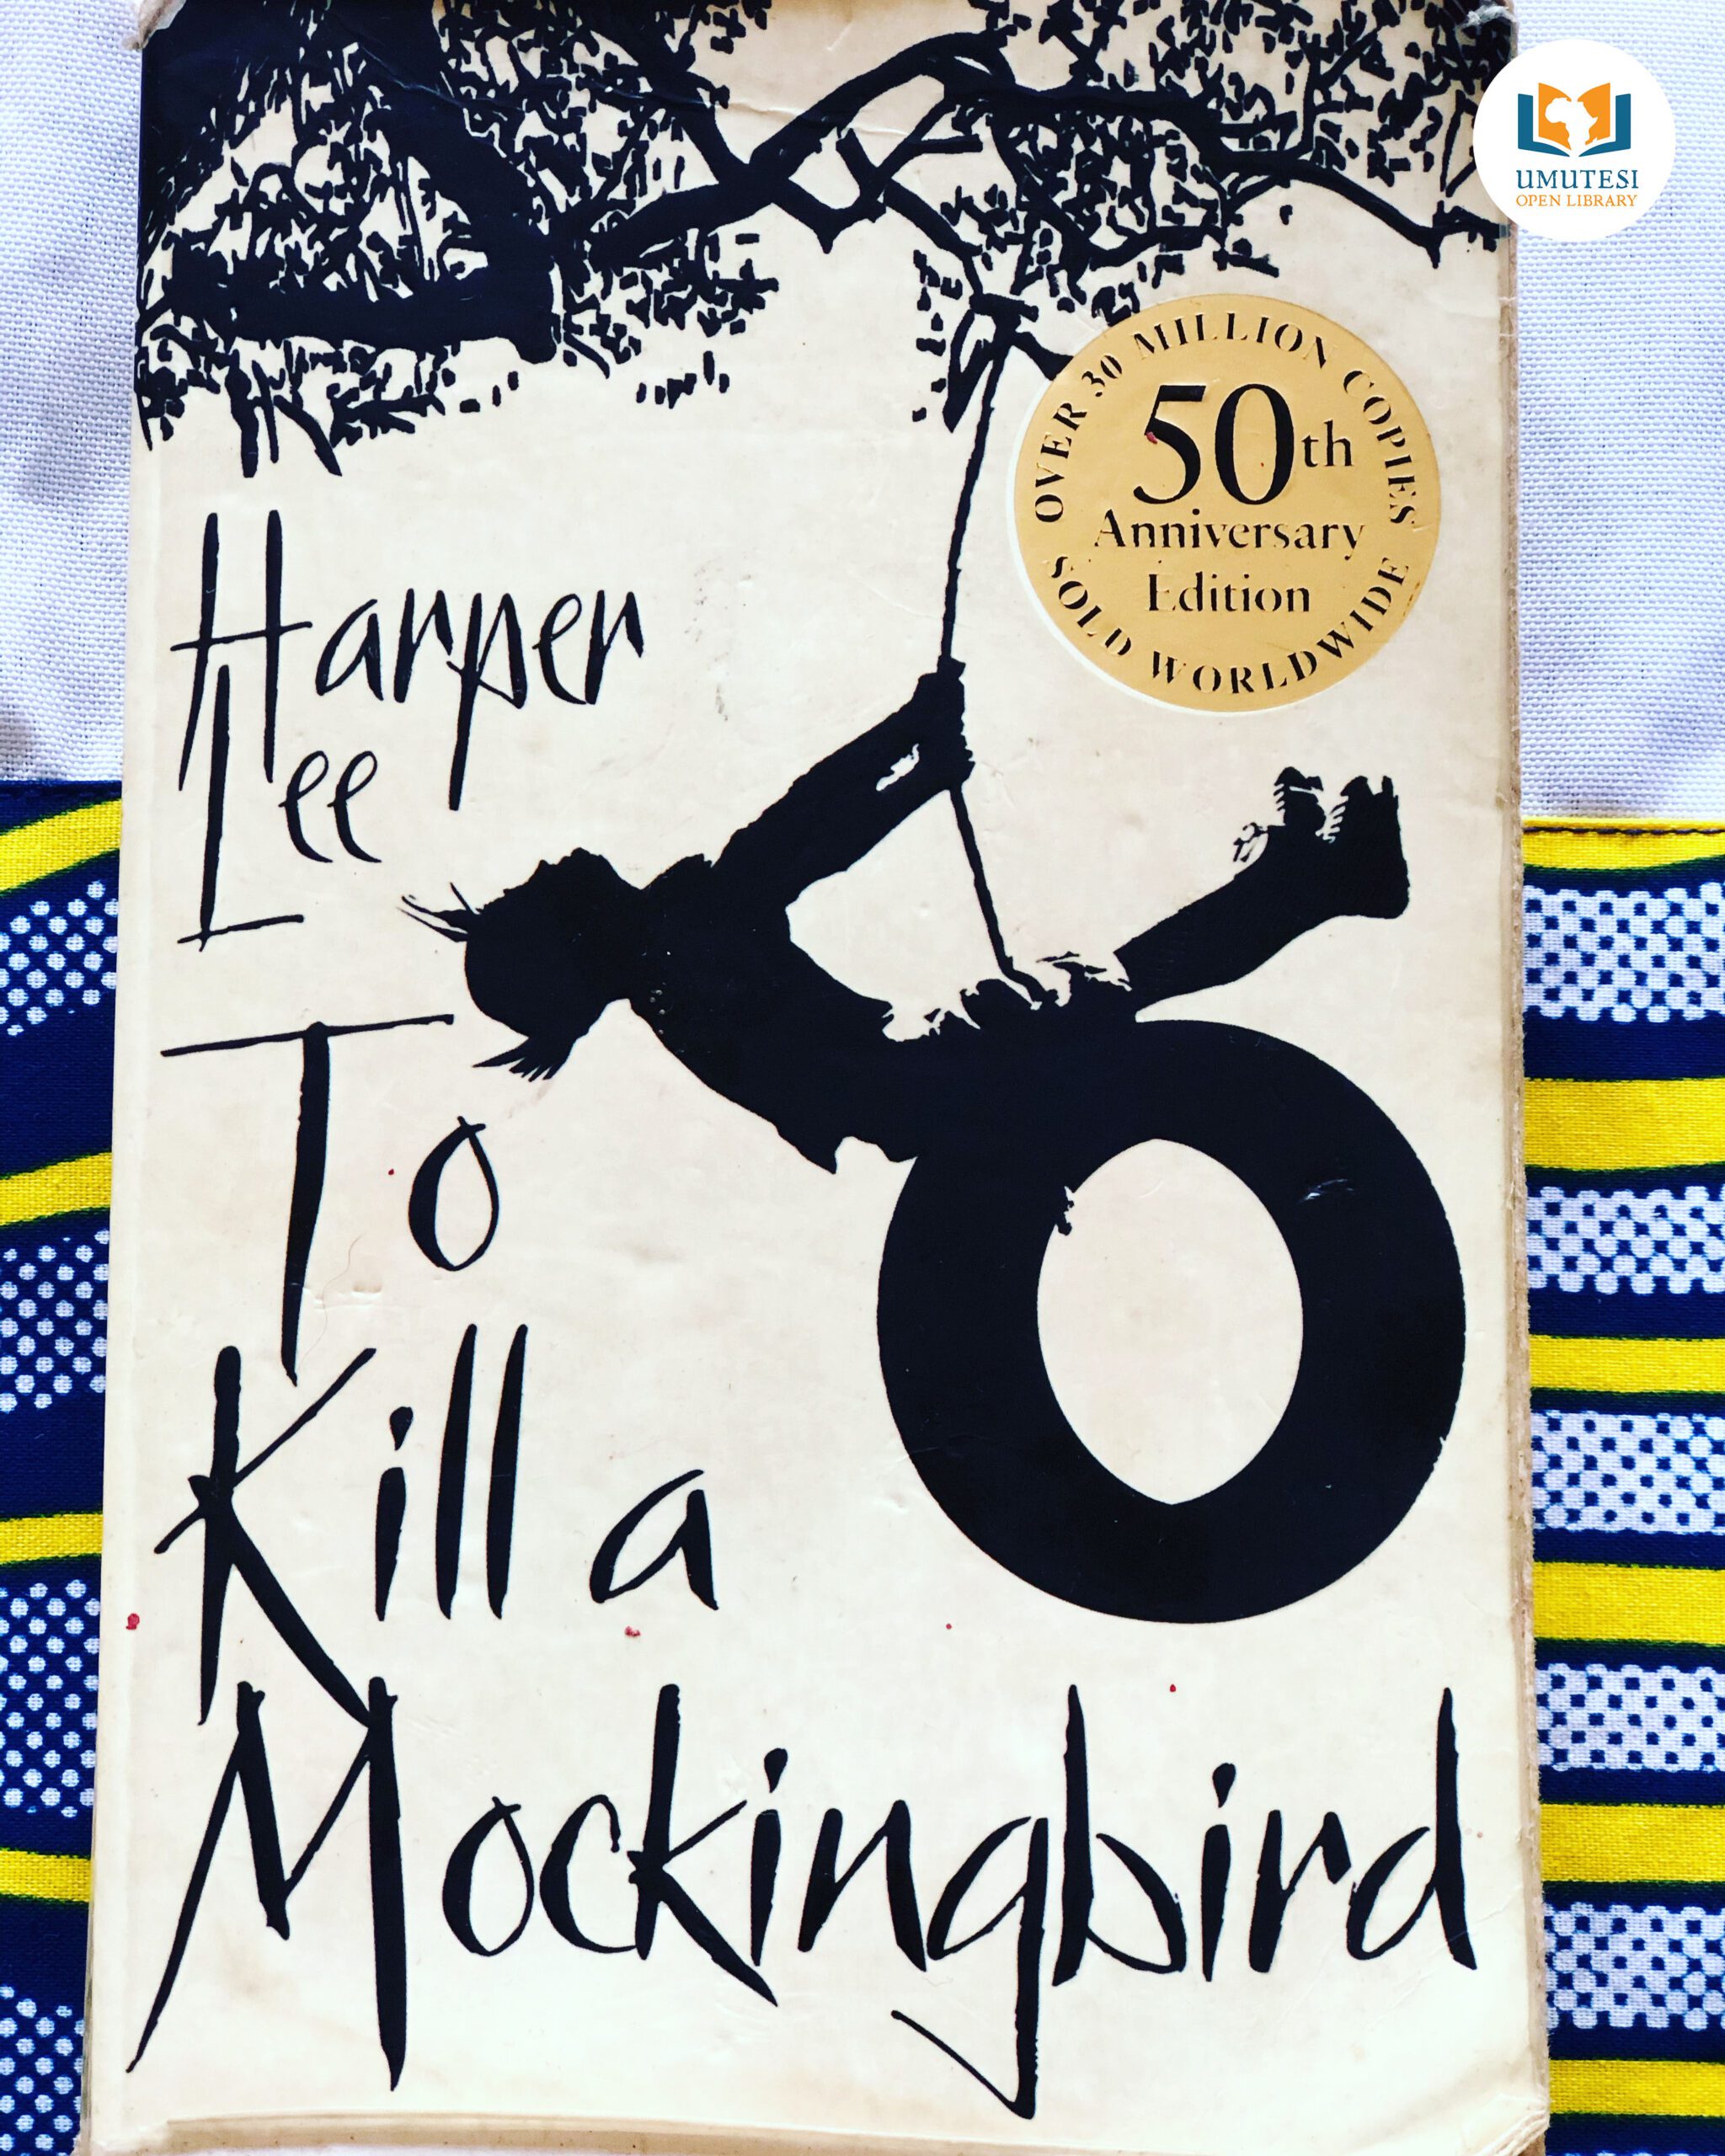 How To Kill A MockingBird by Harper Lee